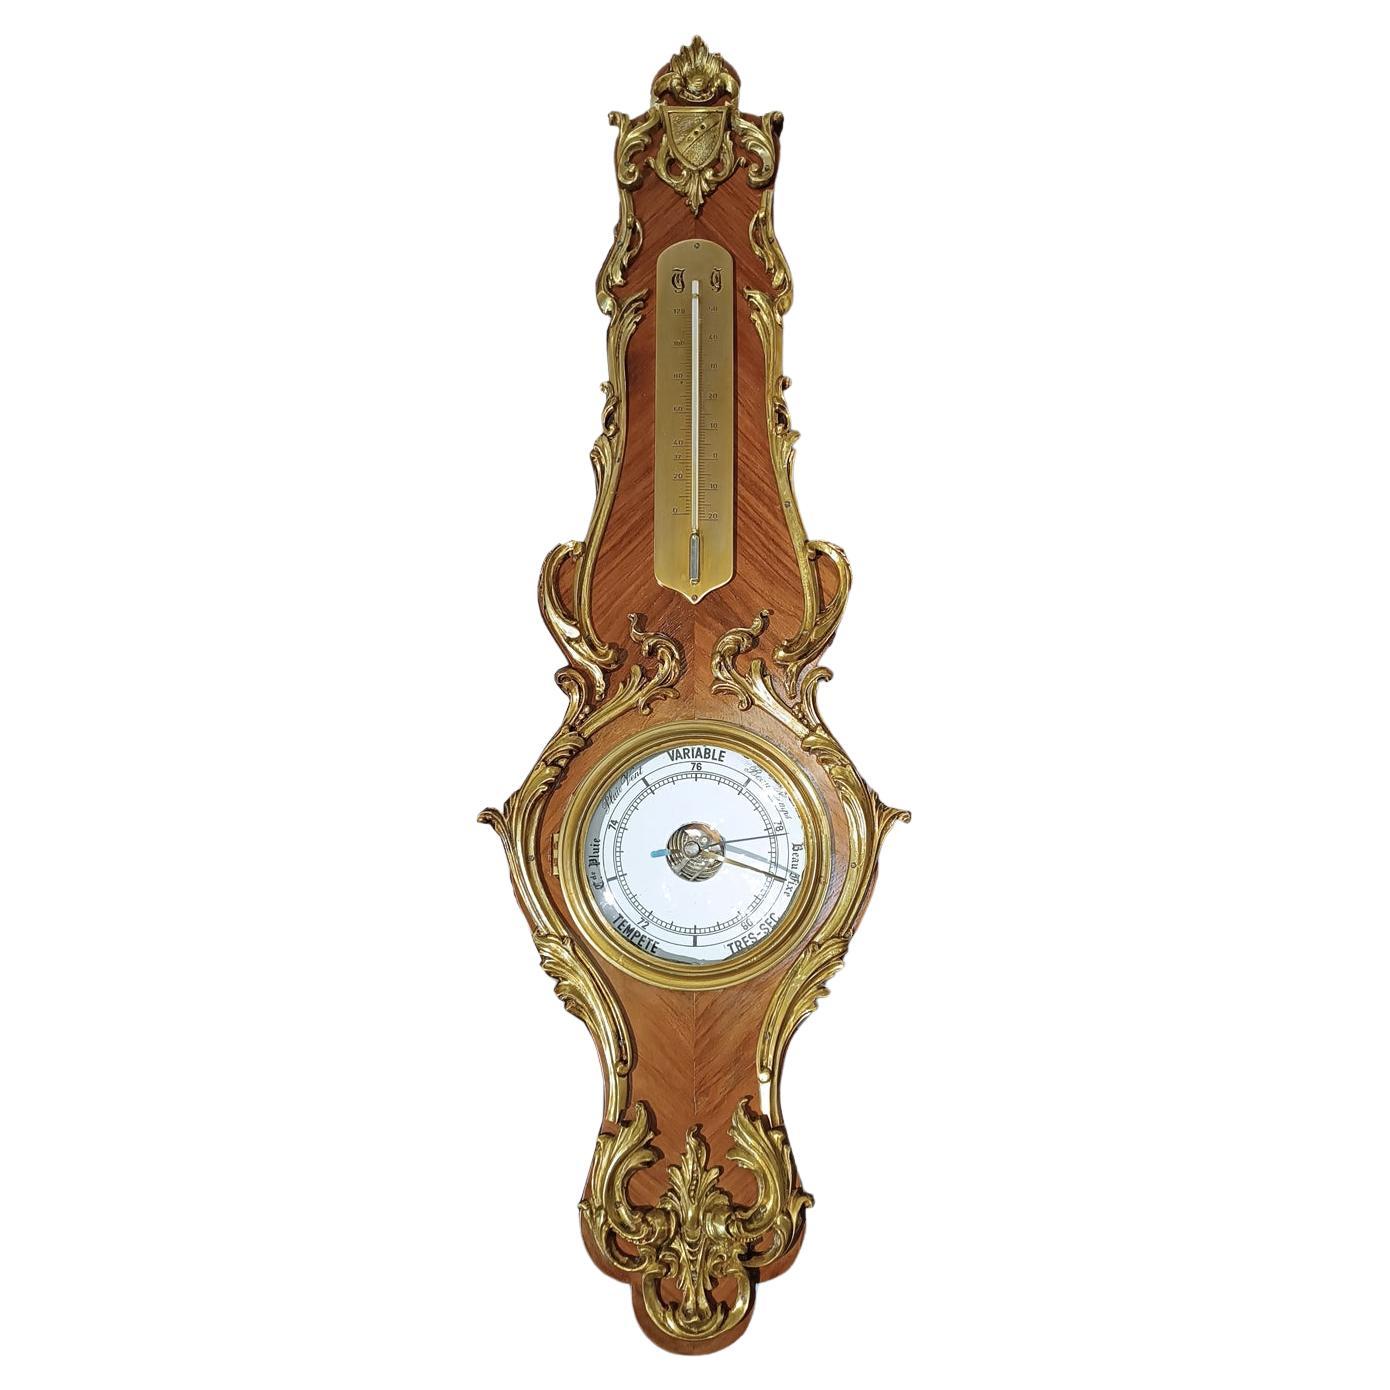 SECOND HALF OF THE 19th CENTURY NAPOLEON III'S BAROMETER For Sale